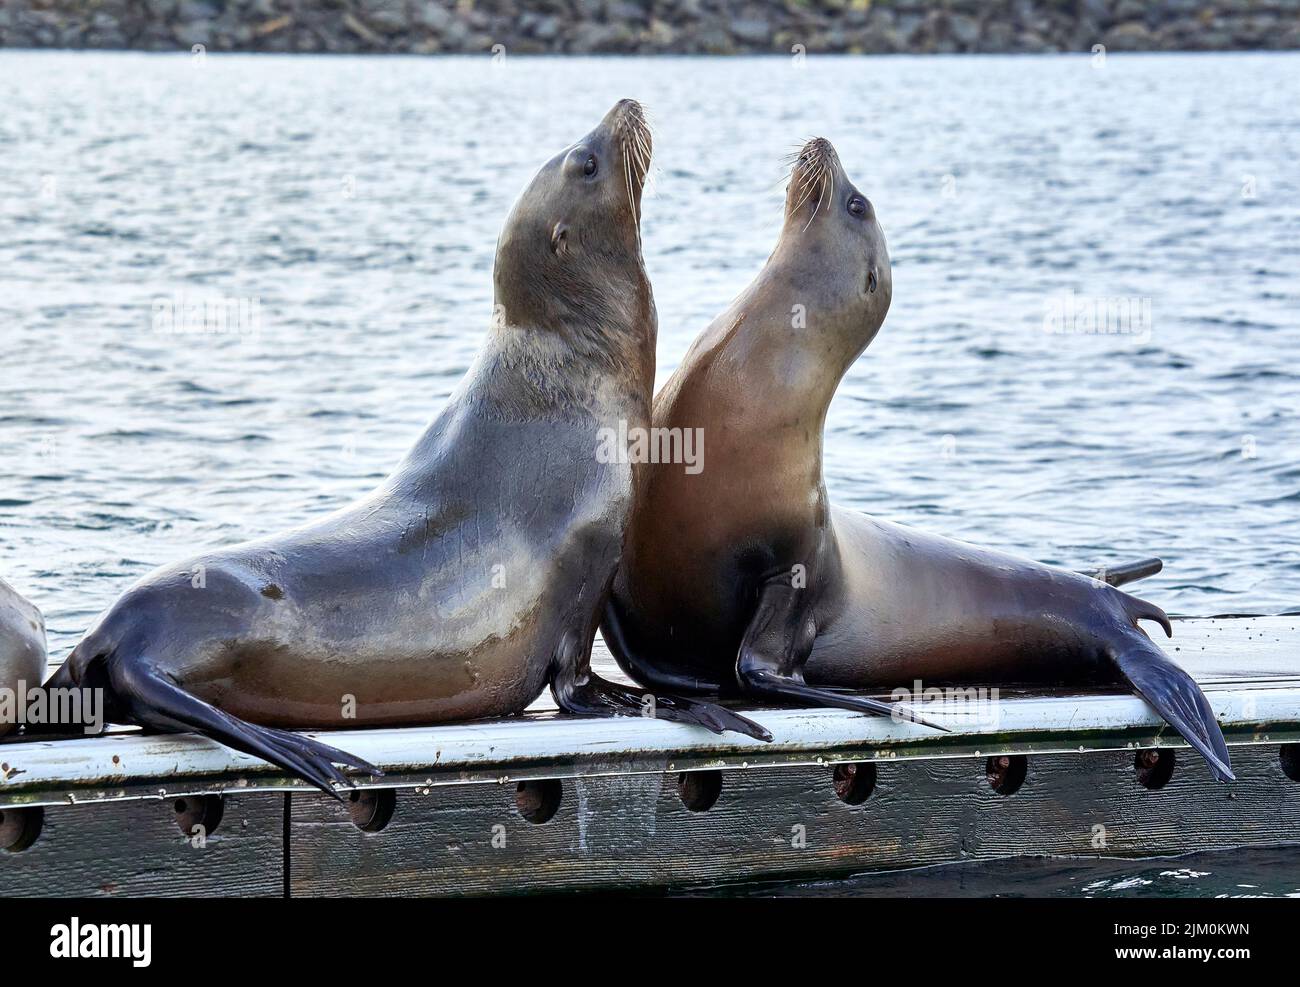 A closeup of two adorable sea lions looking up on a blurred water background Stock Photo